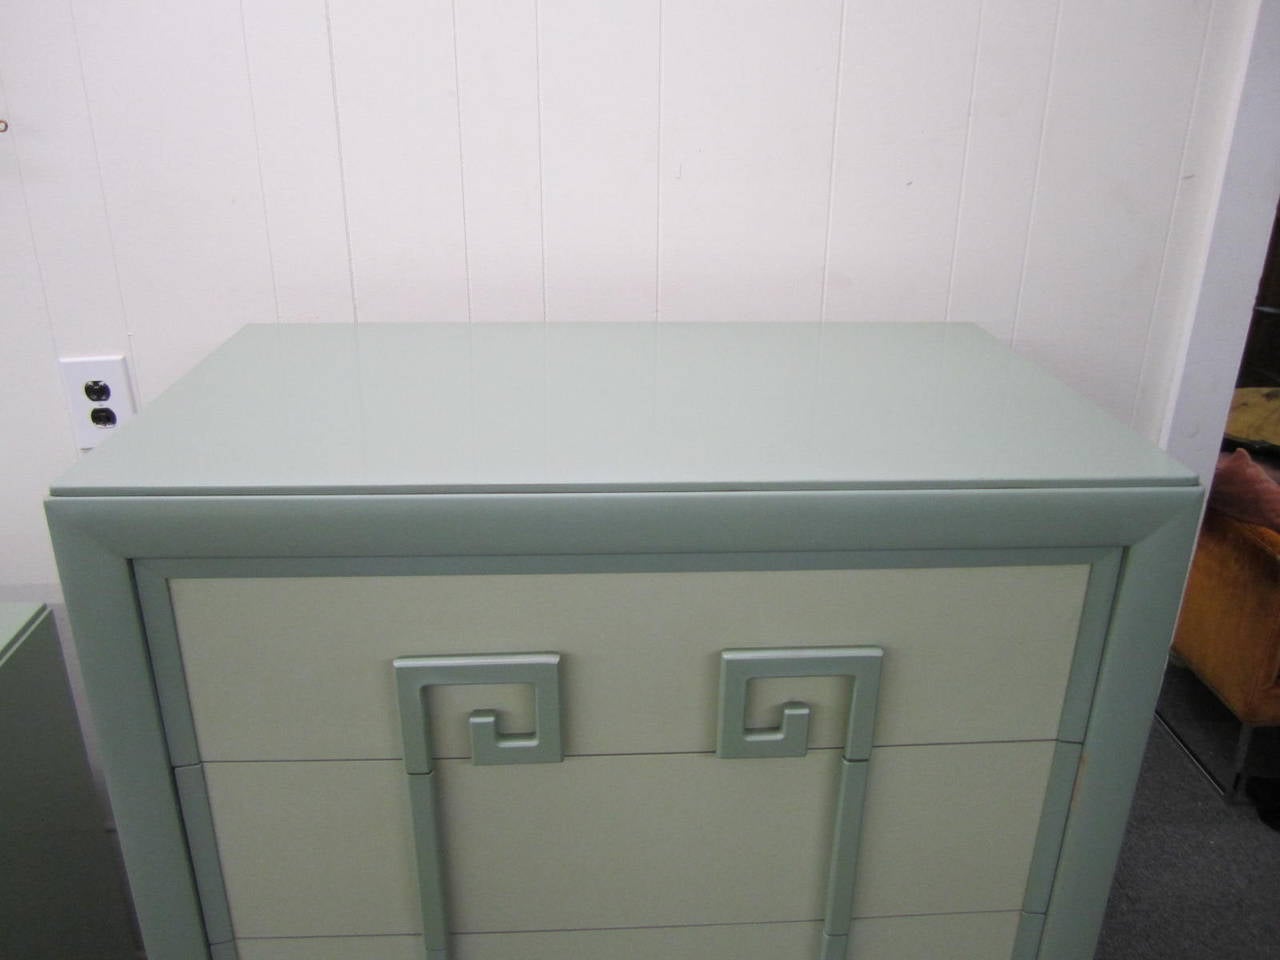 Fabulous tall chest of drawers/dresser by Kittinger from their earliest Mandarin collection with bold Greek Key drawer handles. Retains it's original two-toned light green lacquer finish in very nice vintage condition. Original Kittinger paper label